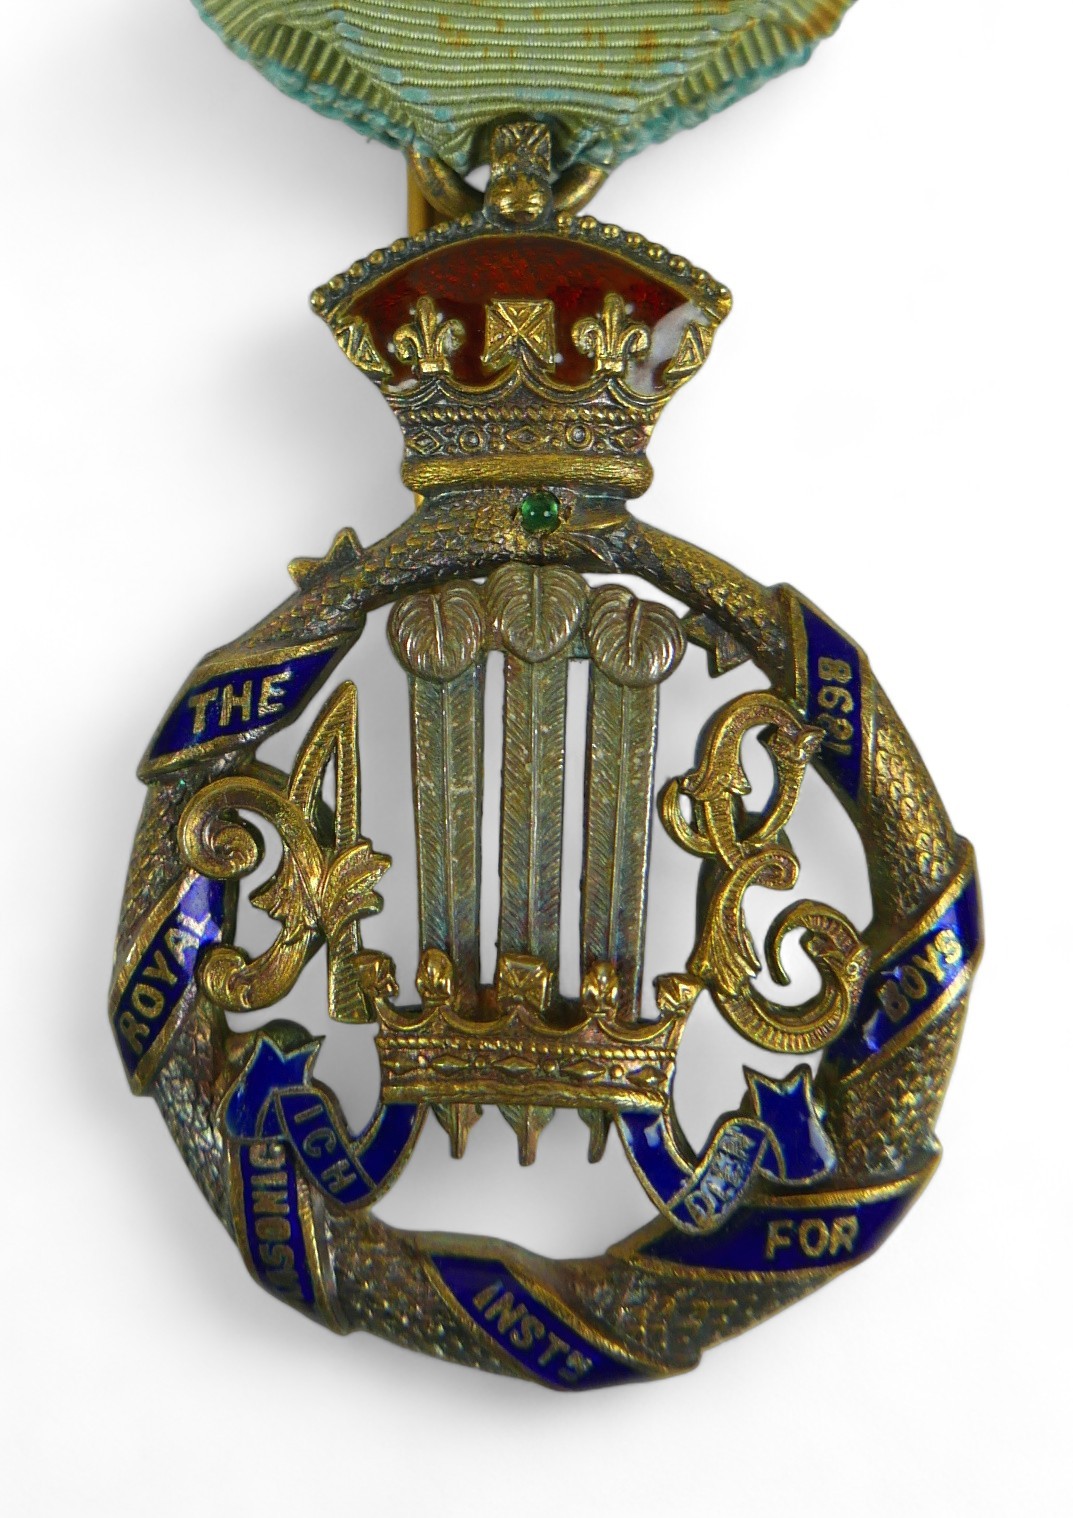 Royal Masonic Institution for Boys, 1892, a gilt-silver and enamel badge by Spencer, London, - Image 7 of 8